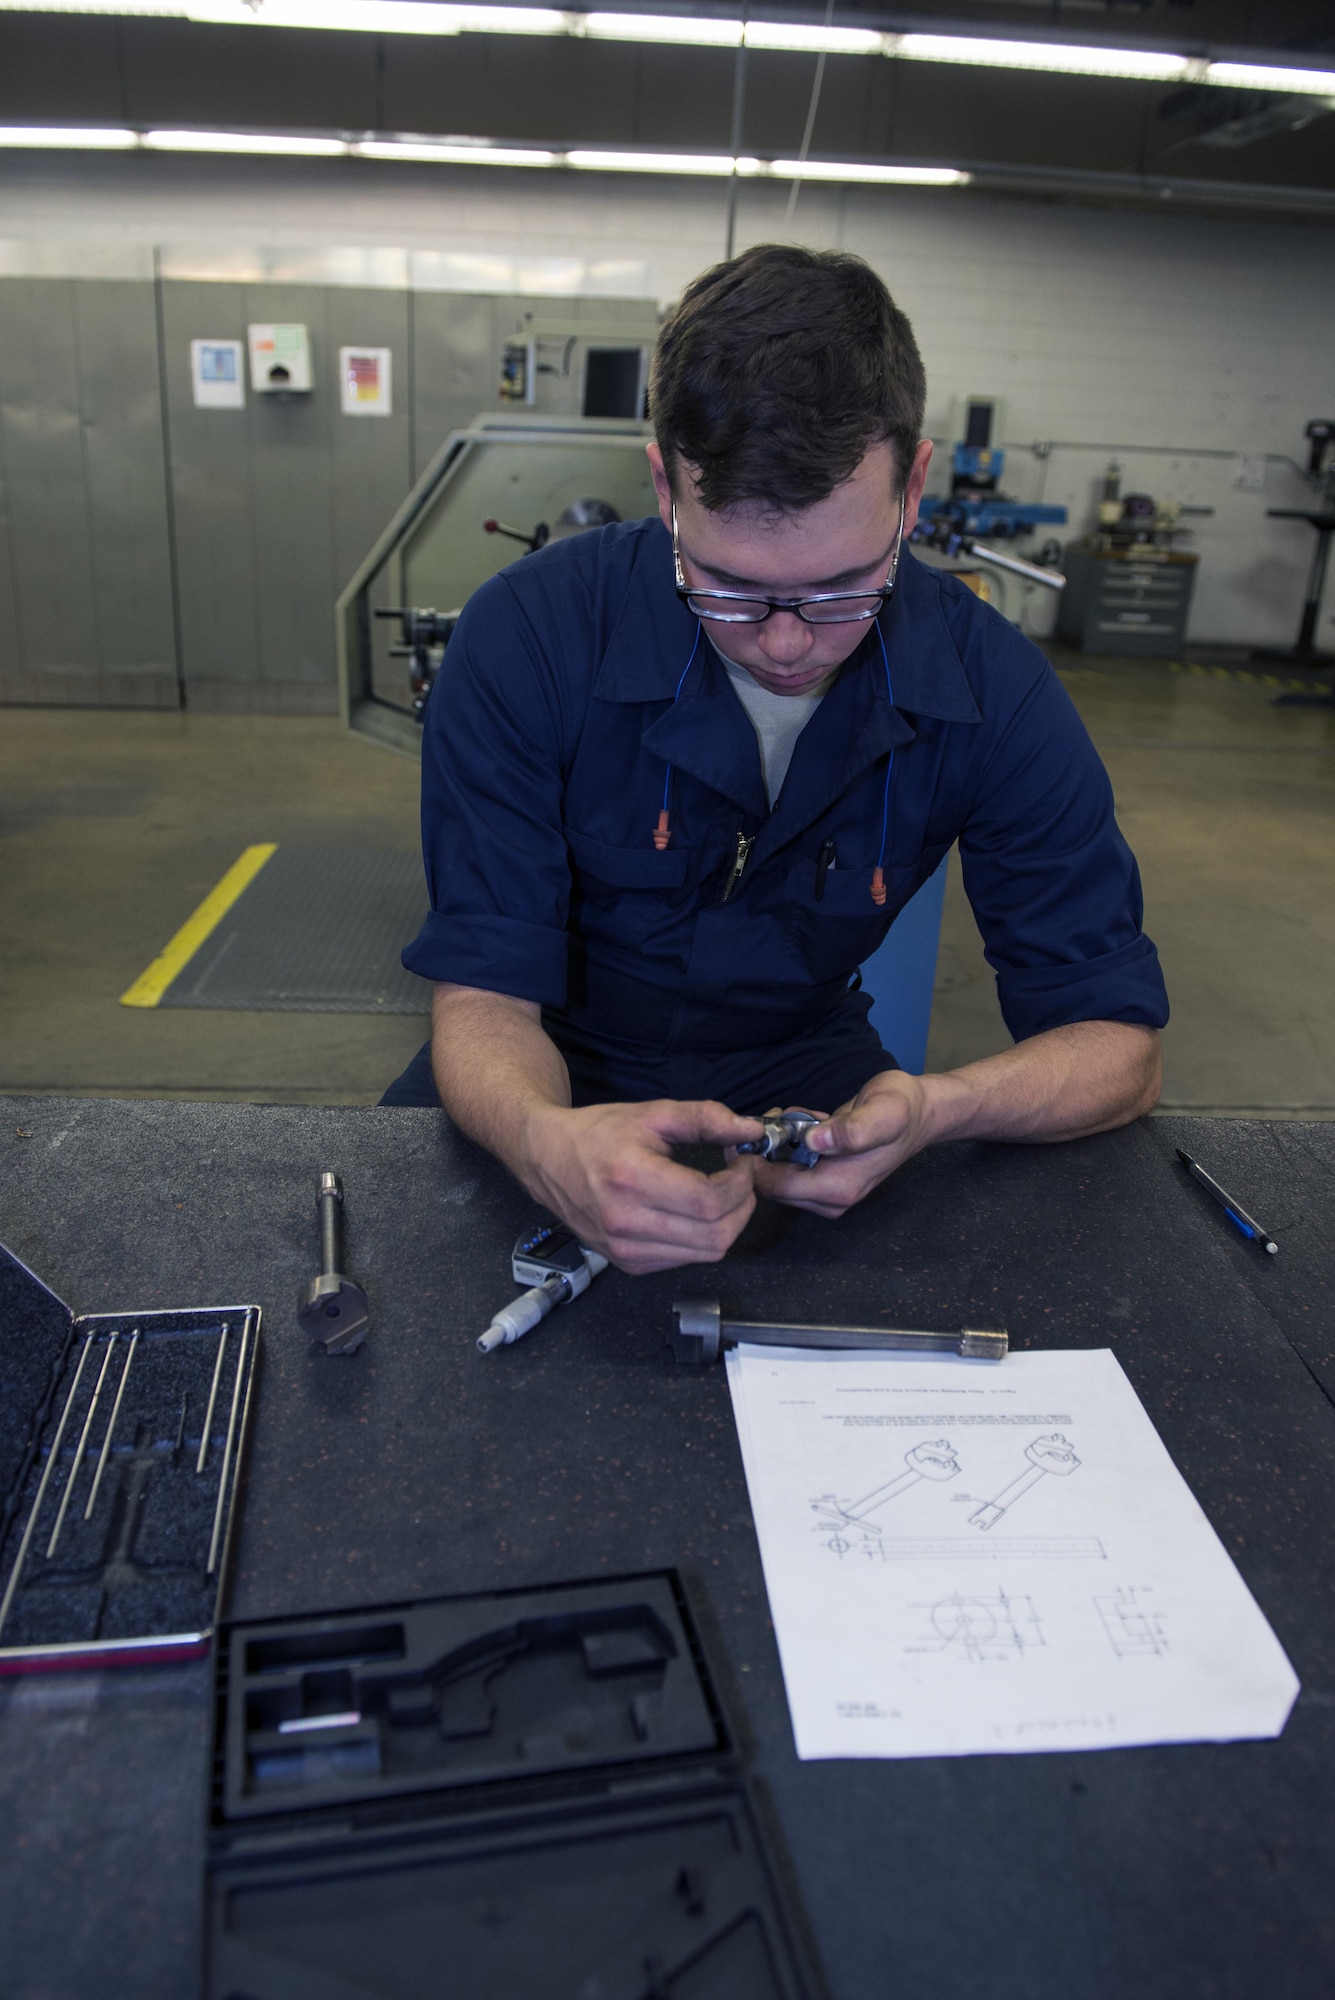 U.S. Air Force Airman 1st Class Joshua Tears-Knapp, 23d Equipment Maintenance Squadron aircraft metals technology technician, reviews a blueprint to assemble a nut removal tool with a micrometer, March 18, 2016, at Moody Air Force Base, Ga. In addition to creating aircraft and equipment components, metals technology technicians write programs for manufacturing methods, maintain and inspect metal working machinery and draw sketches and templates for select materials. (U.S. Air Force photo by Airman 1st Class Greg Nash/Released)  